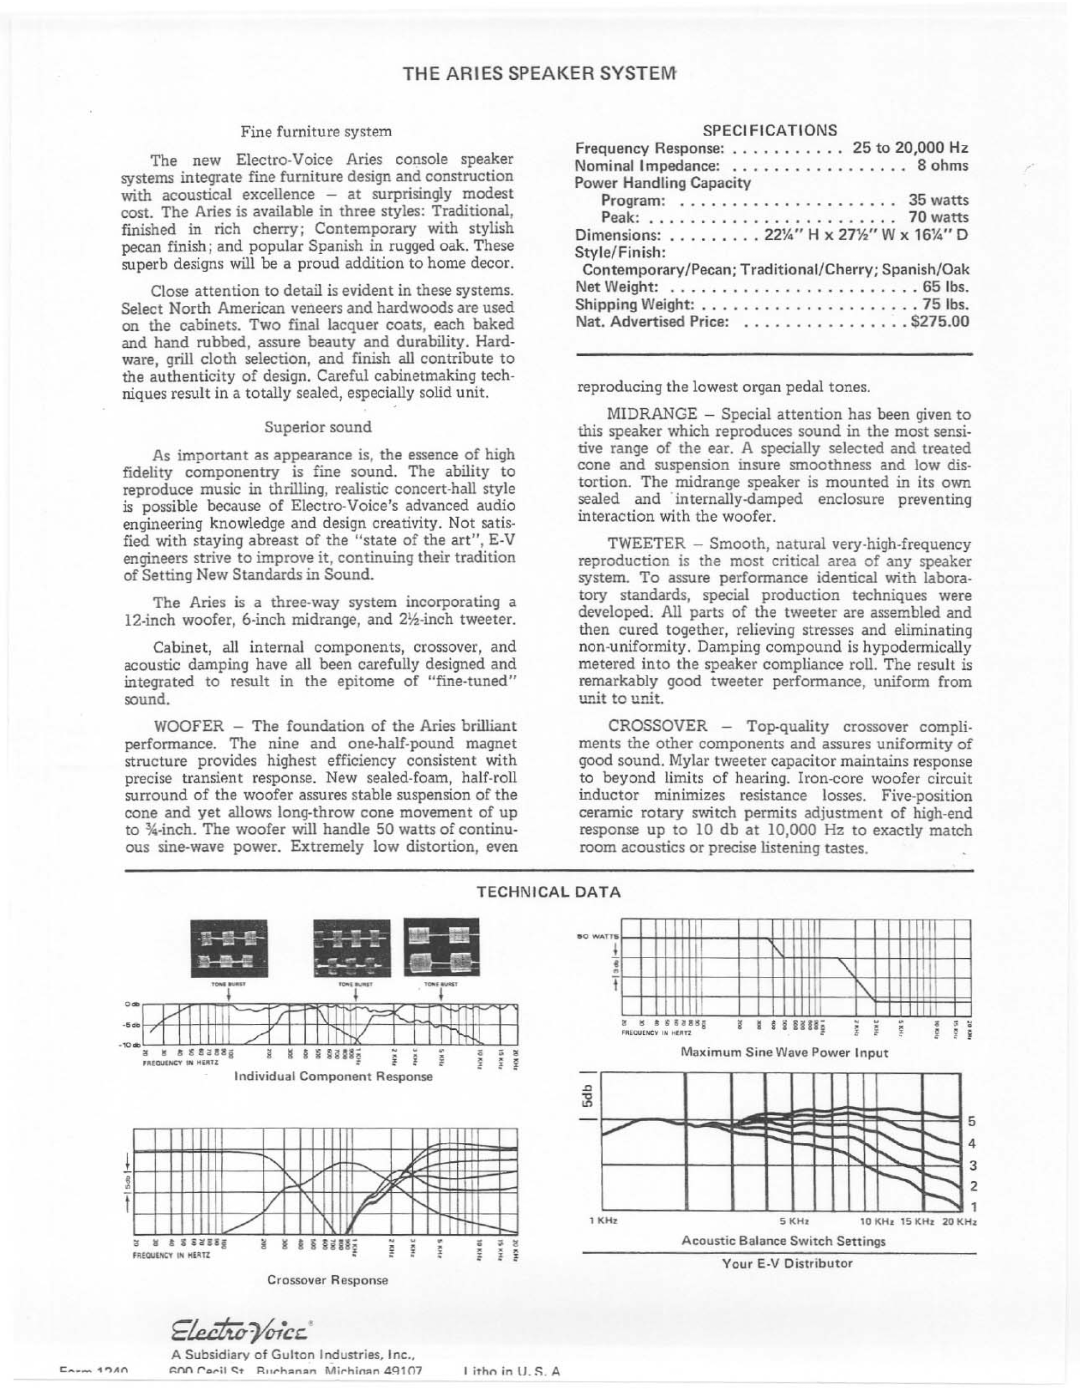 Electro-Voice Console Speaker System manual 